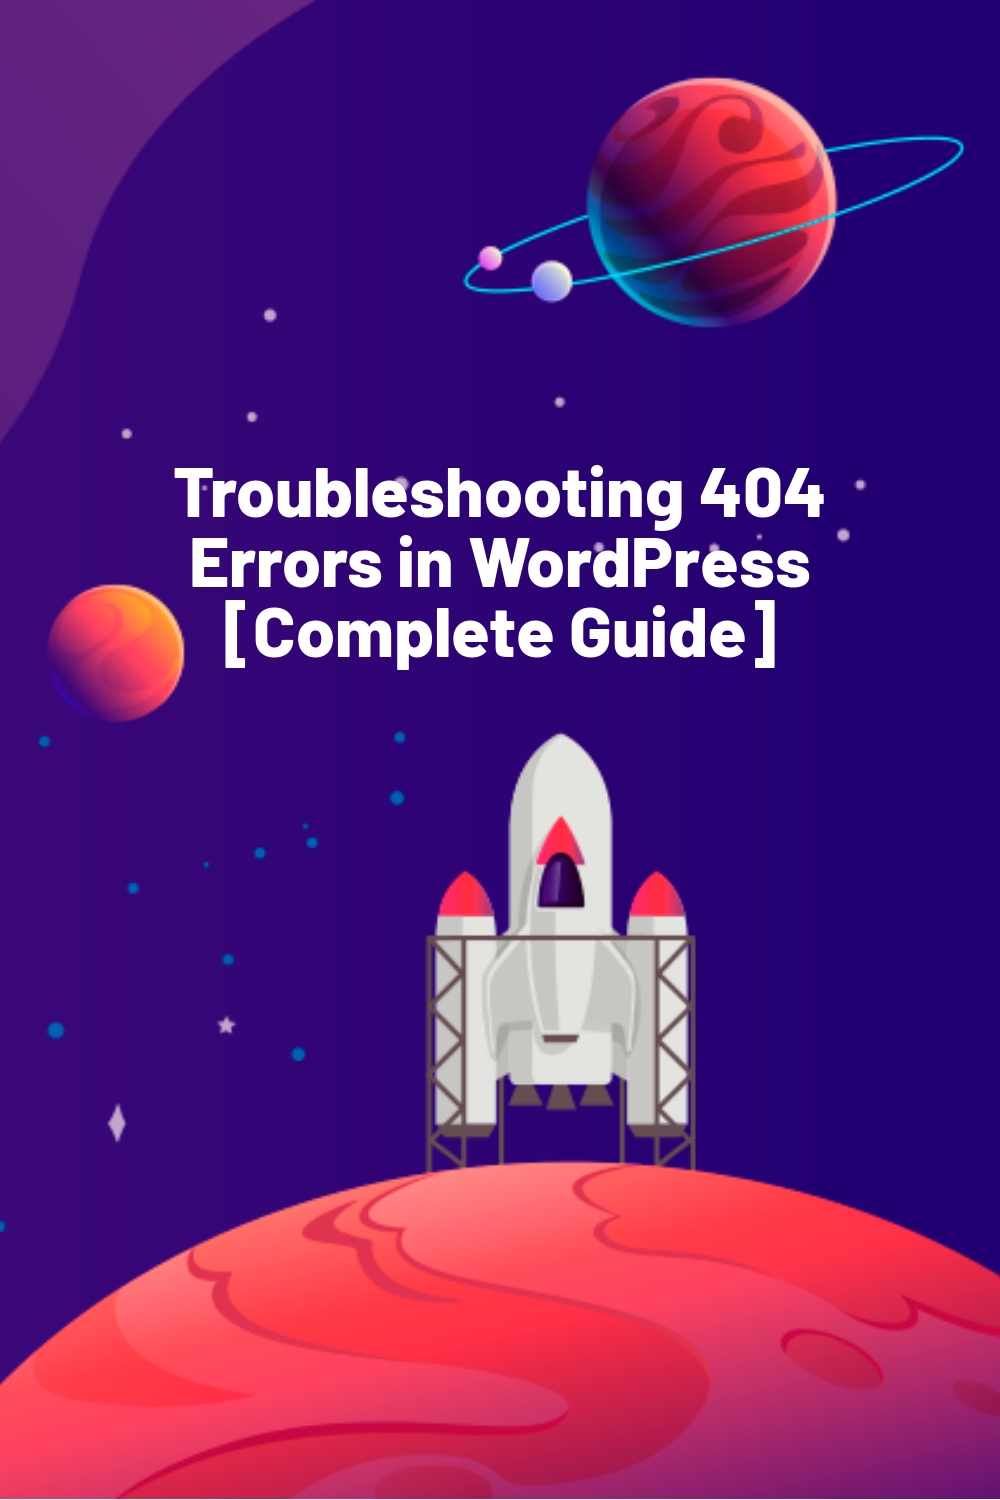 Troubleshooting 404 Errors in WordPress [Complete Guide]